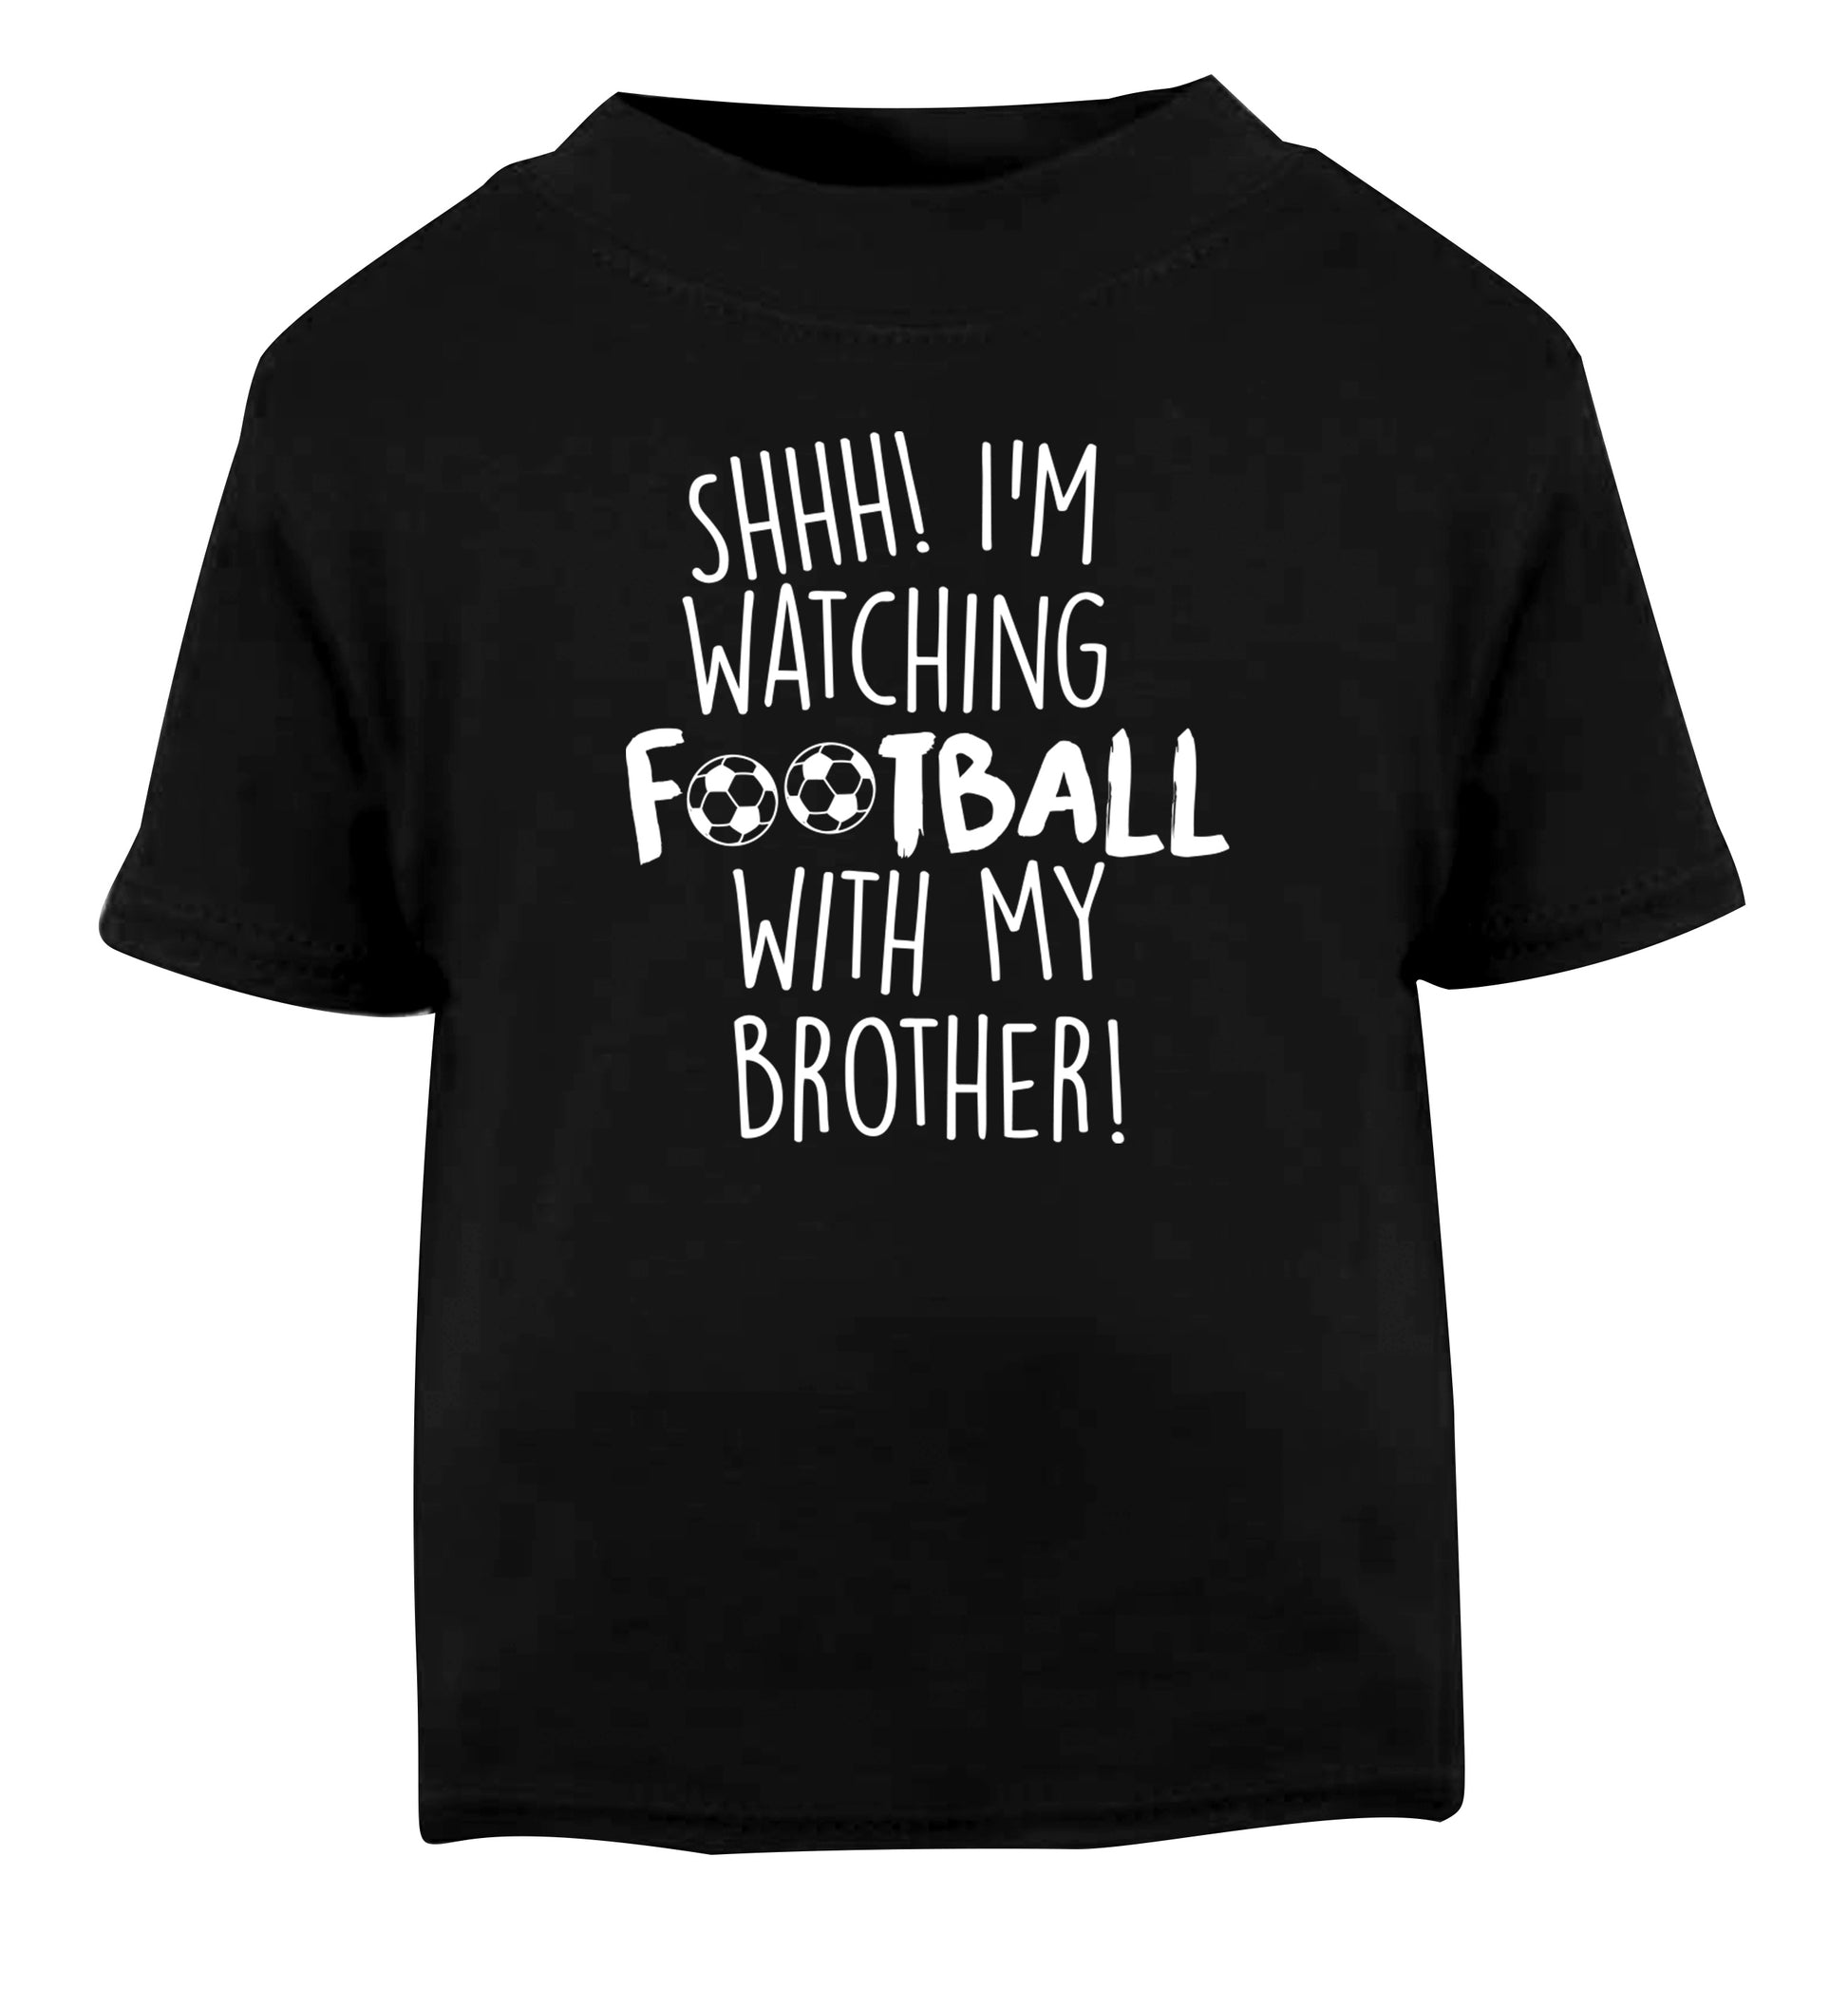 Shhh I'm watching football with my brother Black Baby Toddler Tshirt 2 years